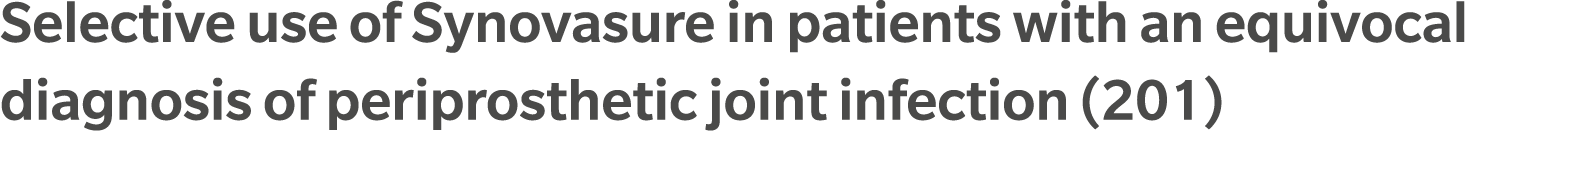 Selective use of Synovasure in patients with an equivocal diagnosis of periprosthetic joint infection (201)